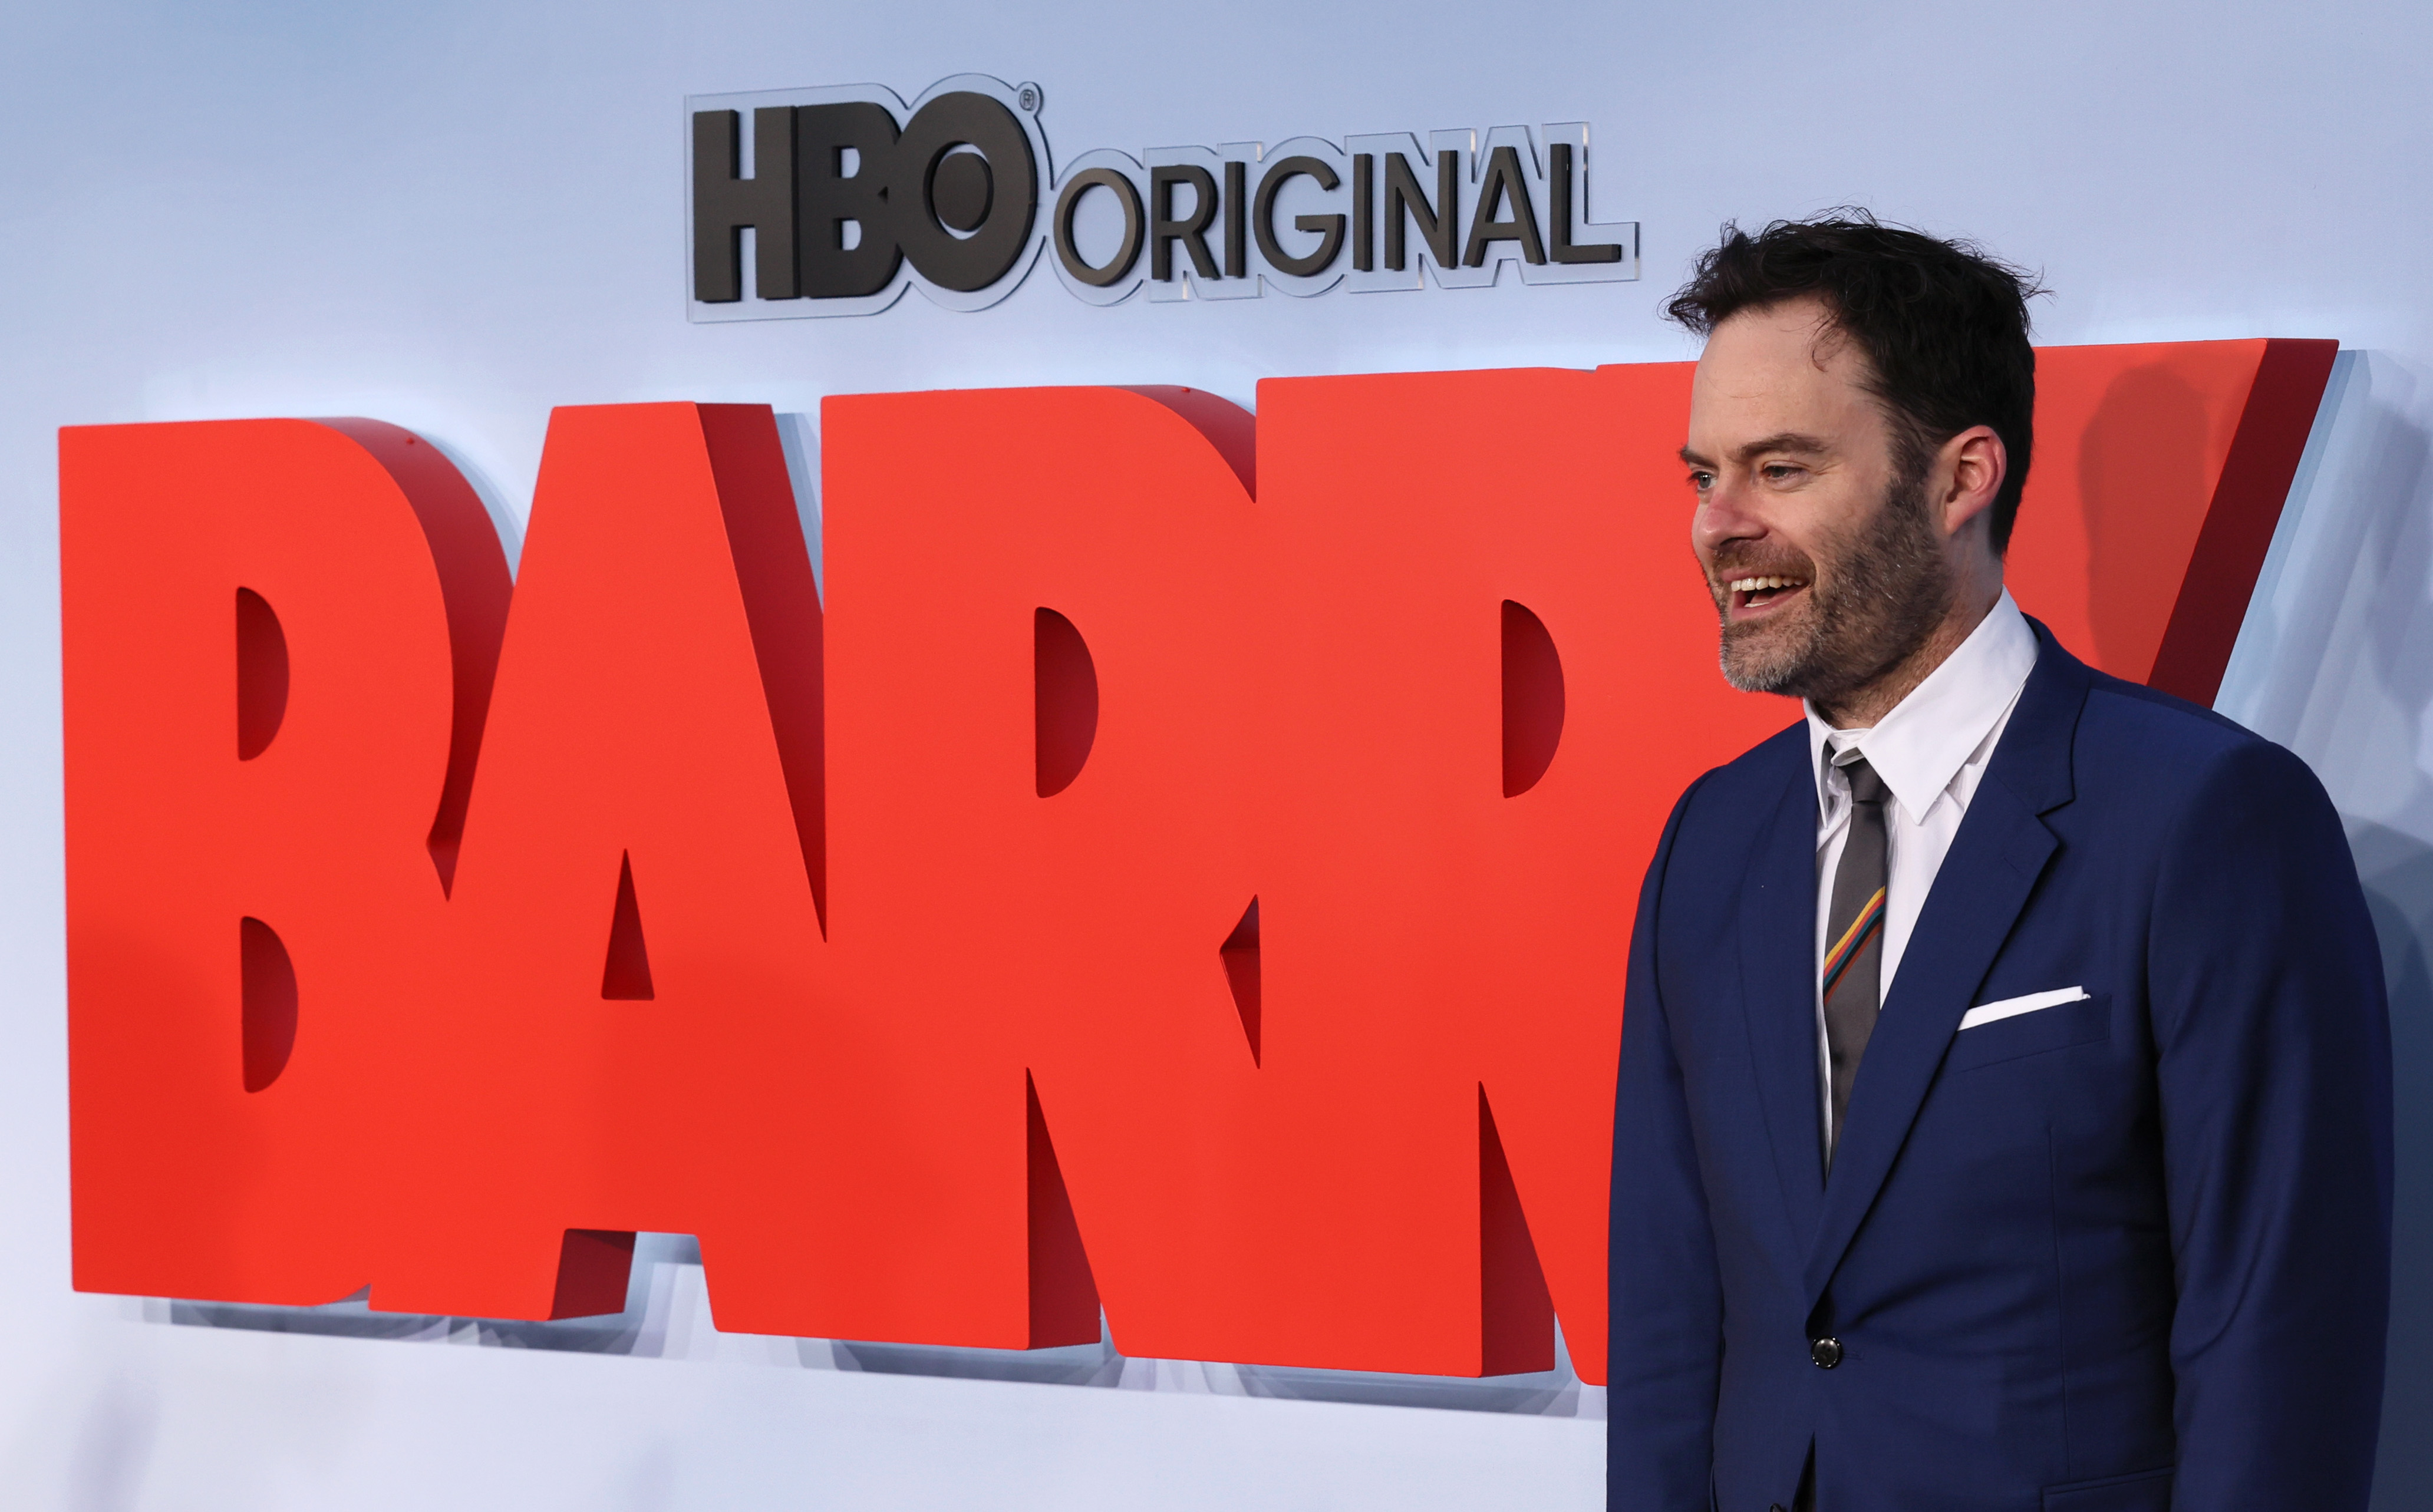 Season 3 Premiere Of HBO’s “Barry” - Arrivals